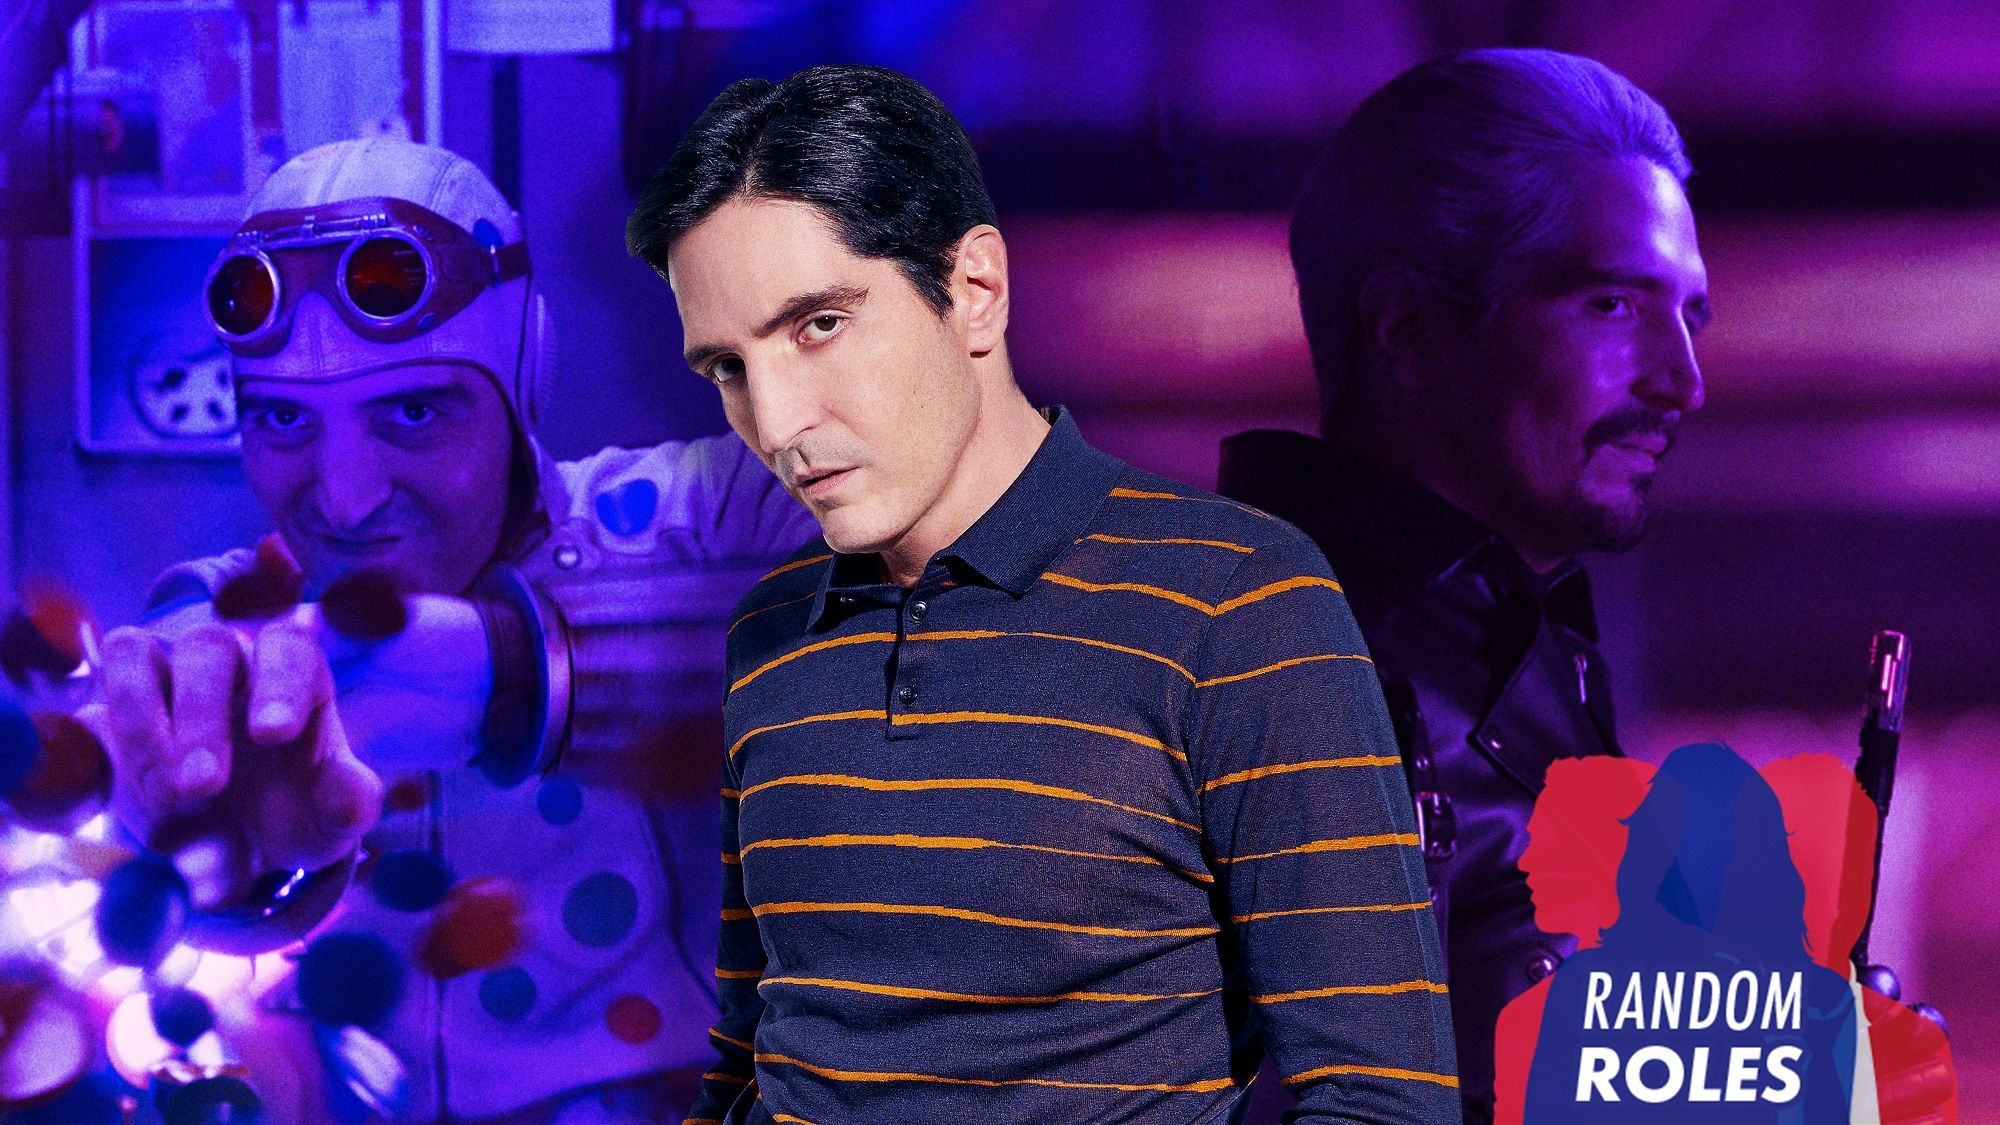 David Dastmalchian could build his own Suicide Squad with all the villains he’s played